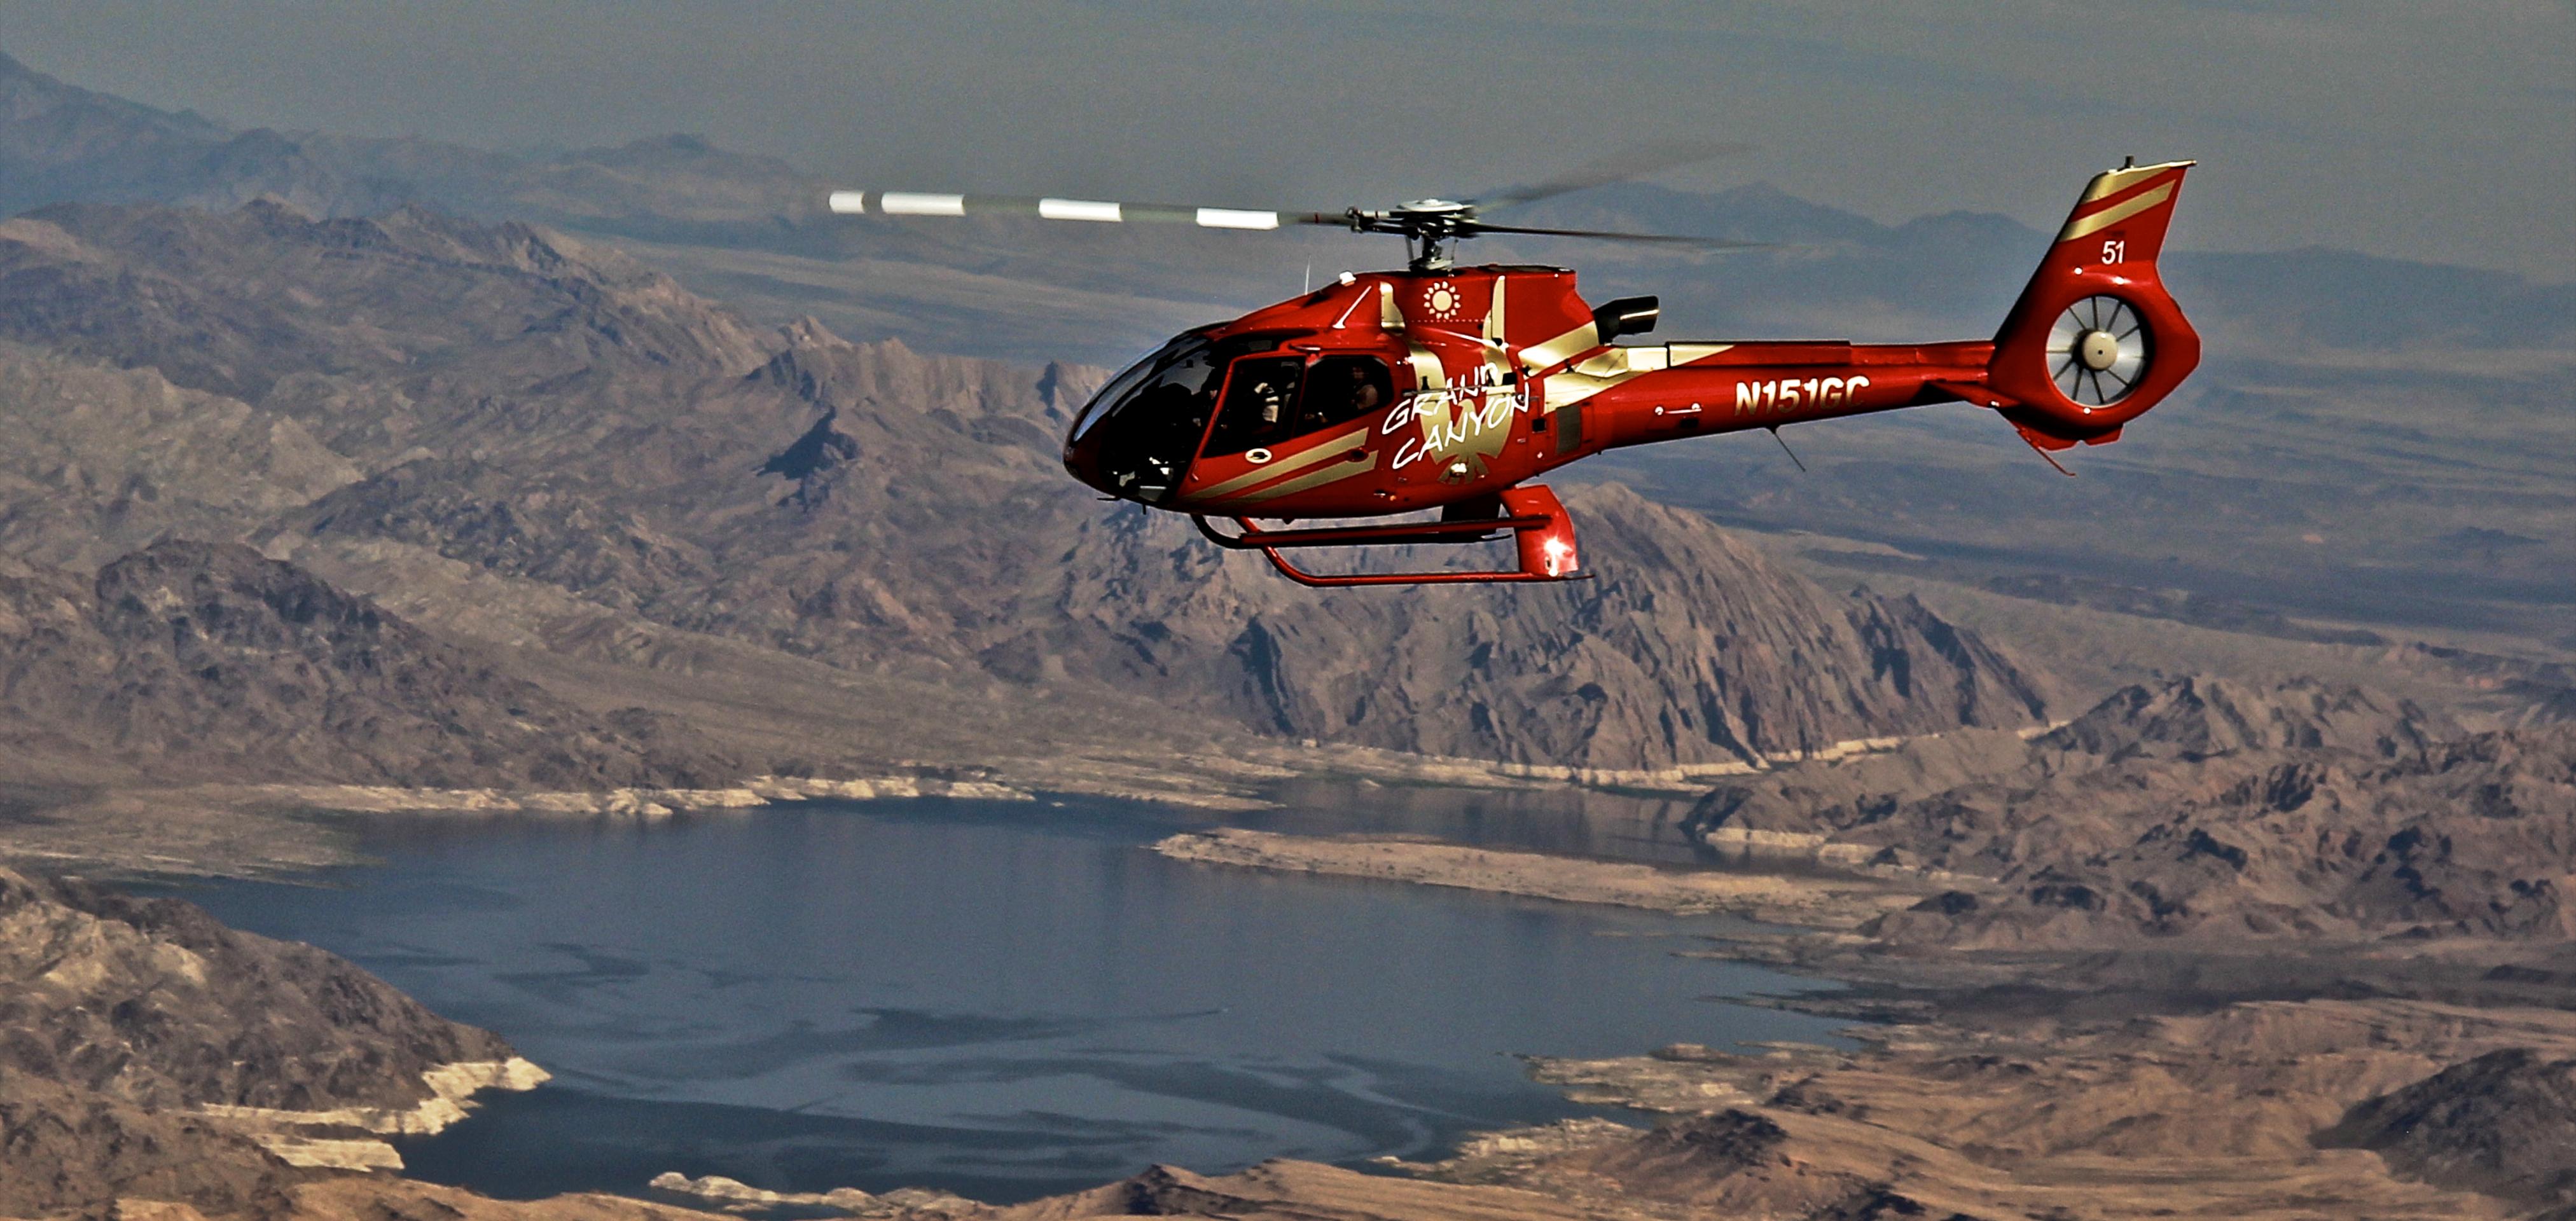 Helicopter flight: Grand Canyon and Hoover Dam - Departing from Las Vegas